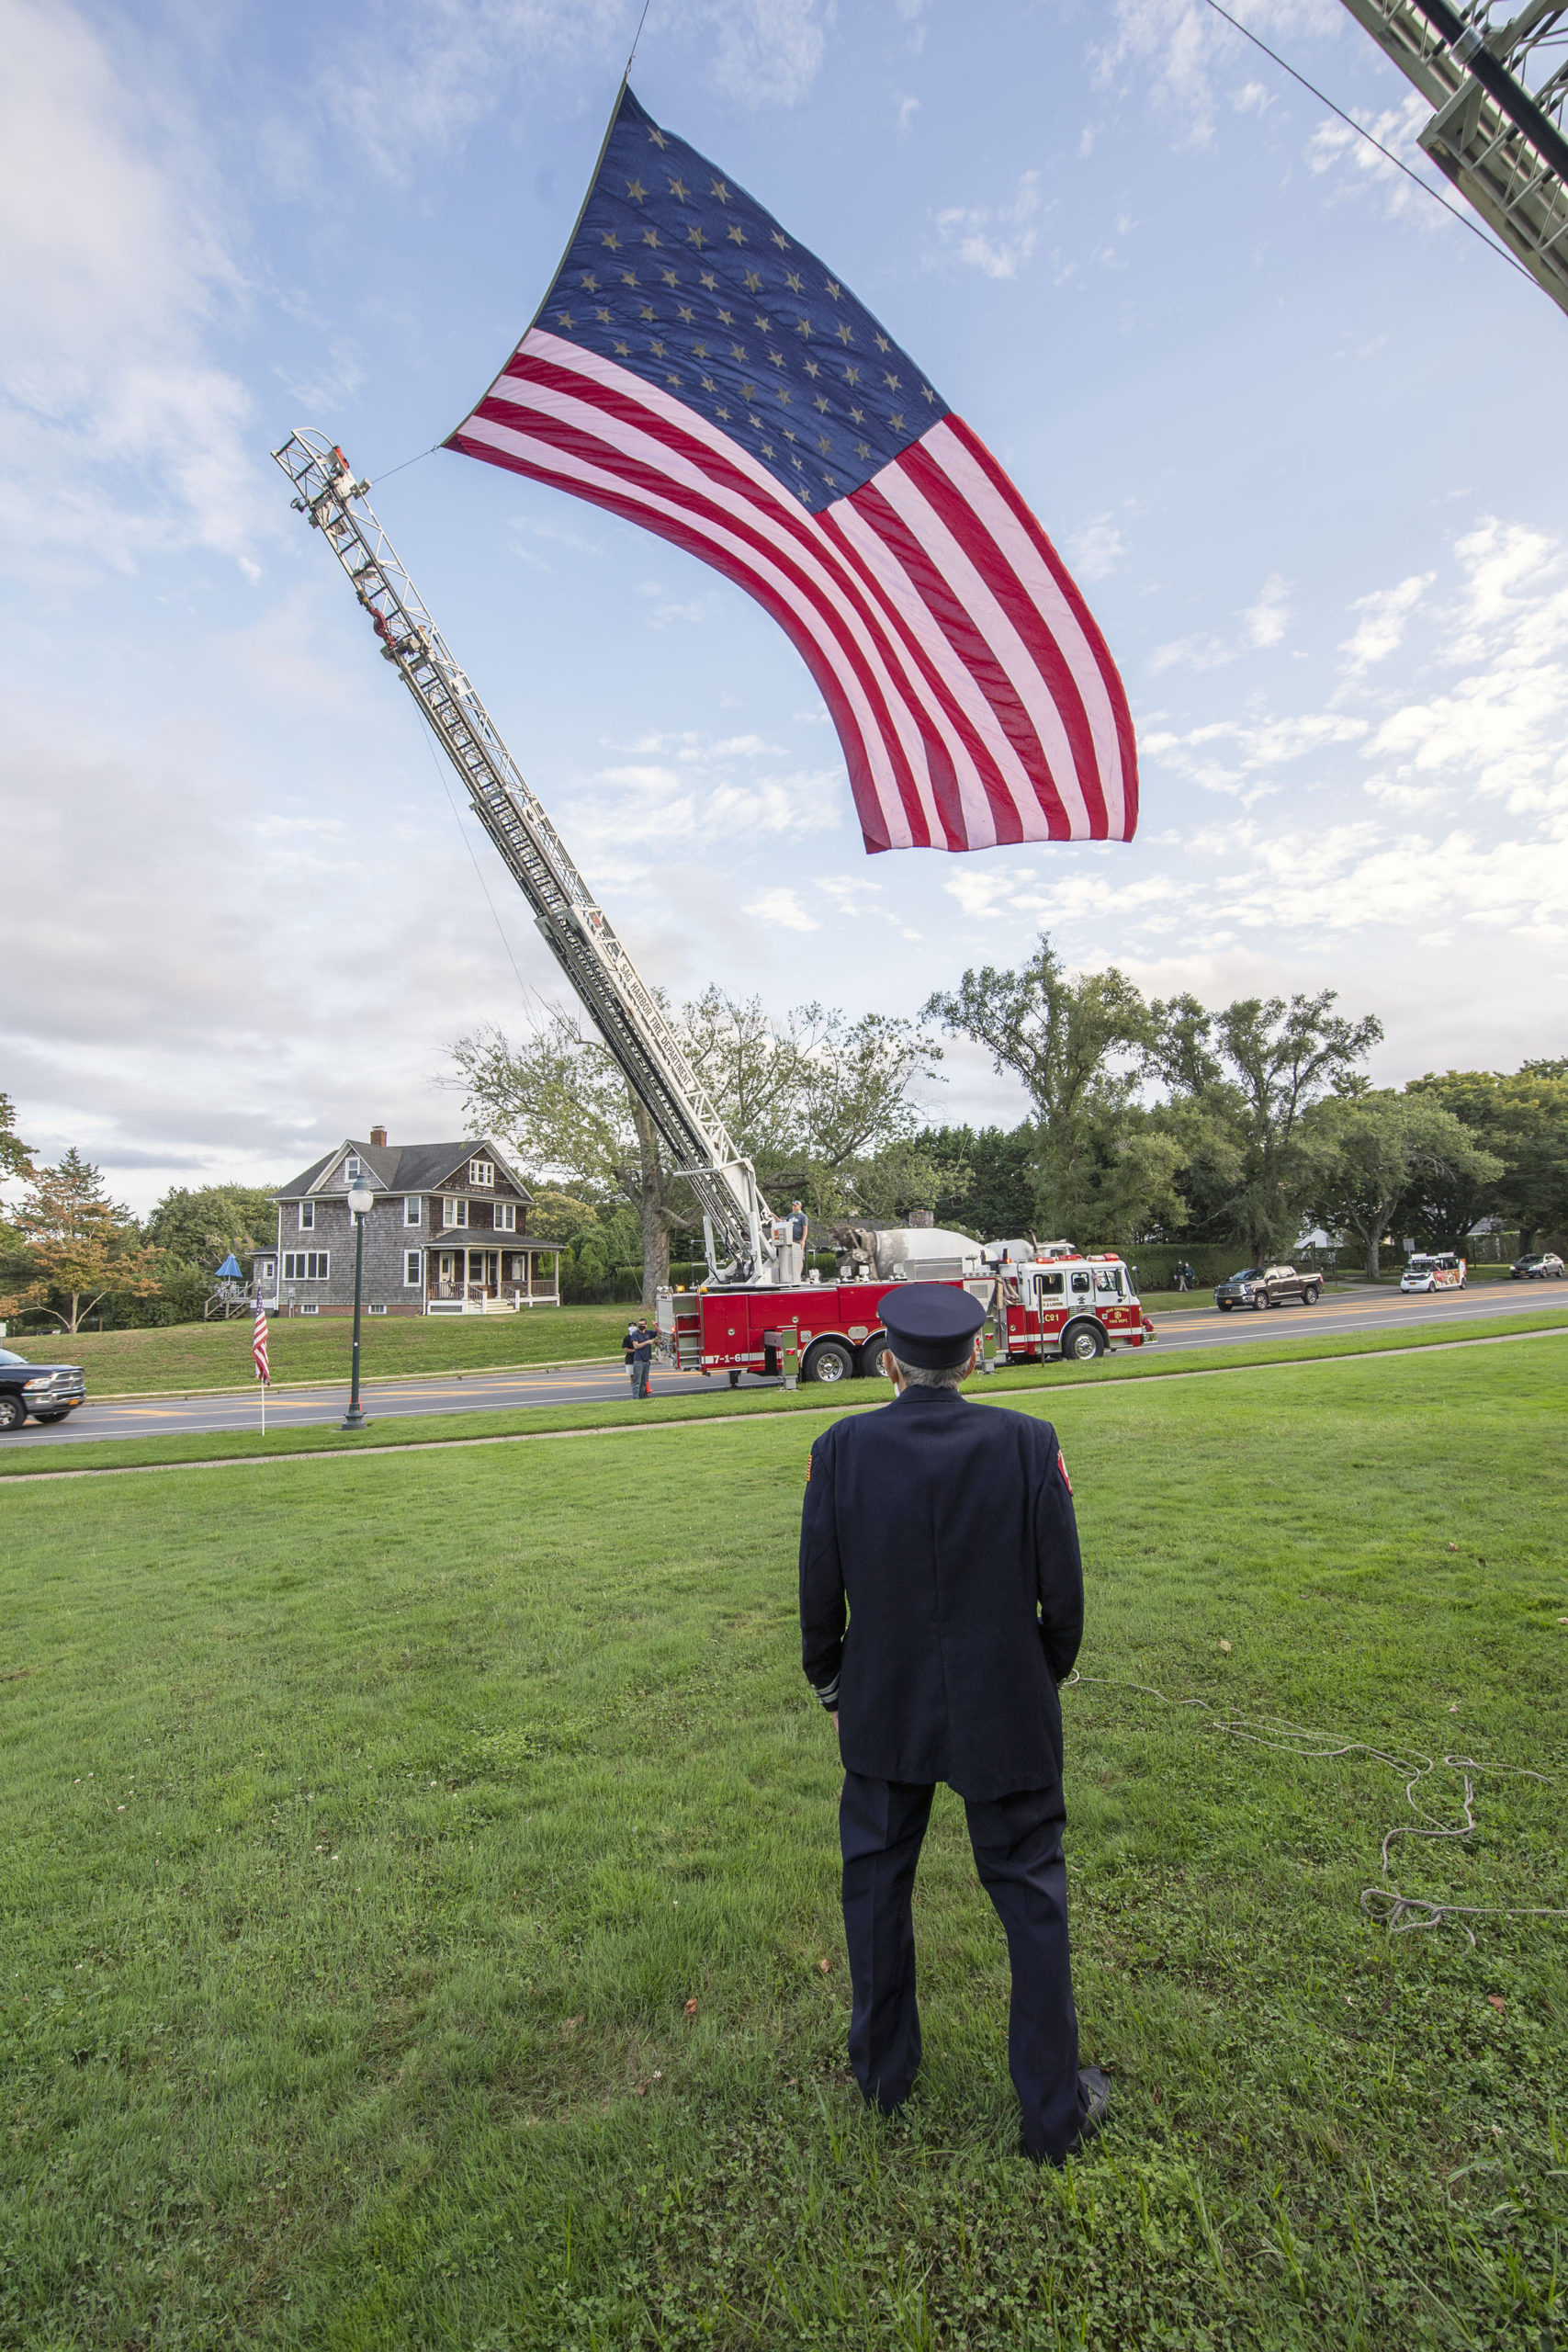 East Hampton Fire Department 50+ year member Joseph DeCristofaro looks up at a large american flag hoisted by EHFD and Sag Harbor FD ladder companies as members of the East End Fire, EMS and Police Departments held a memorial service on the village green in East Hampton commemorating the 19th anniversary of the September 11 attacks.